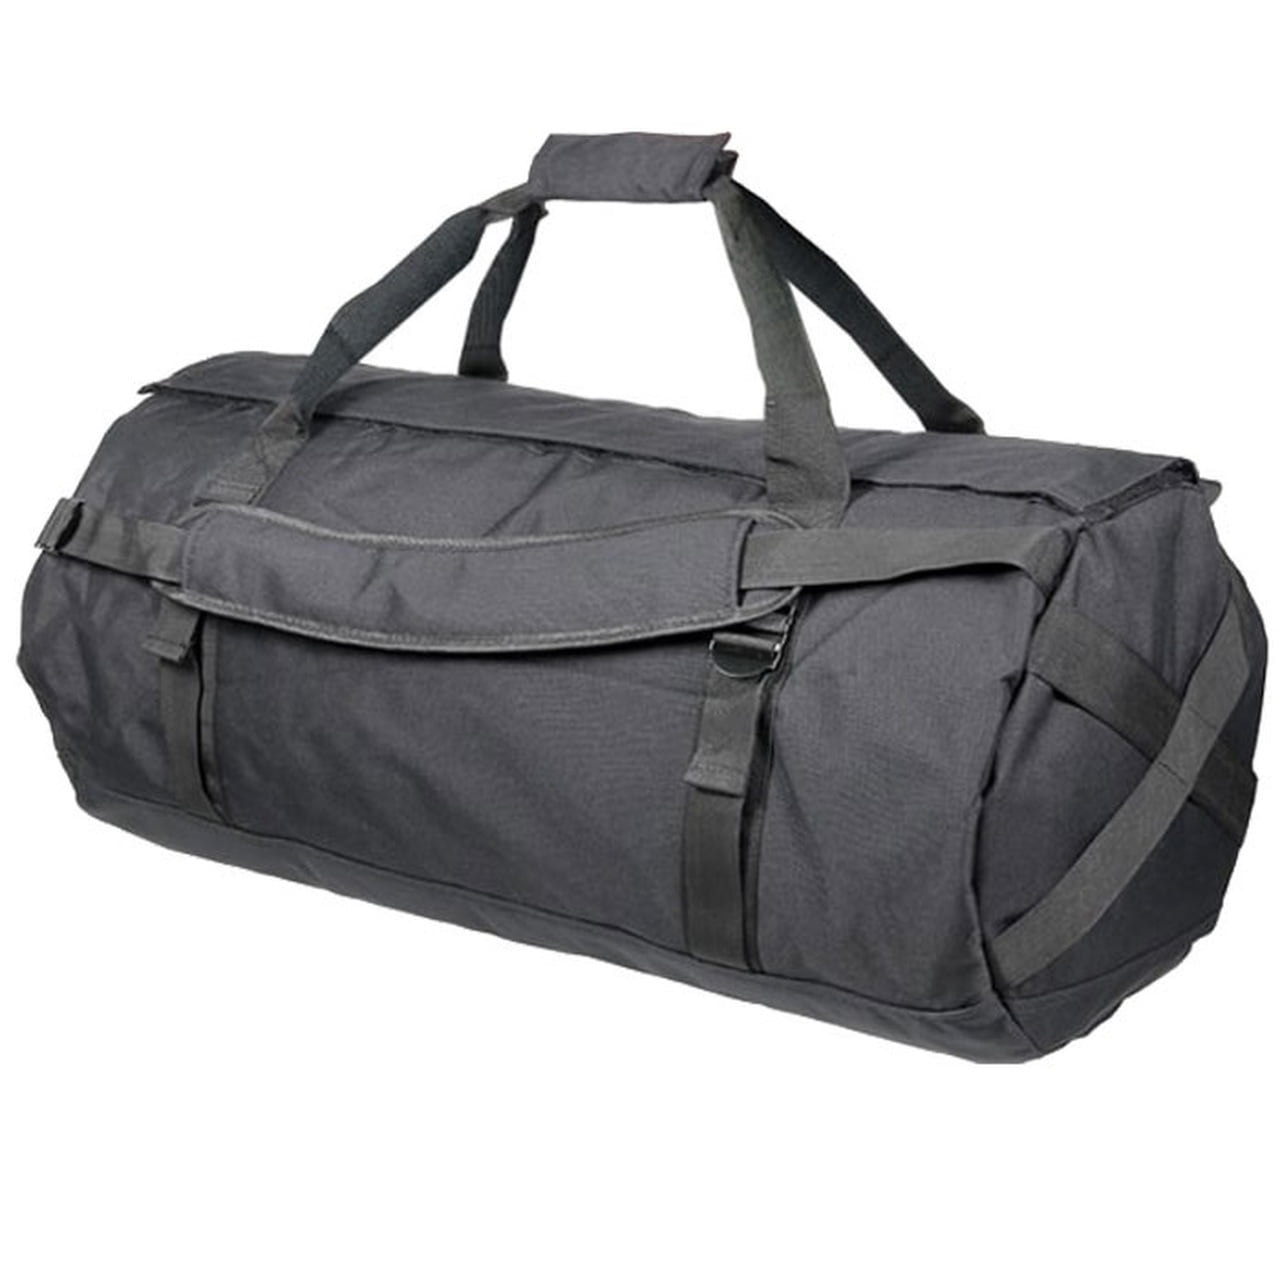 XXL 32” Sports Travel Holdall Luggage Cargo Weekend Carry Business Bag Case RD 